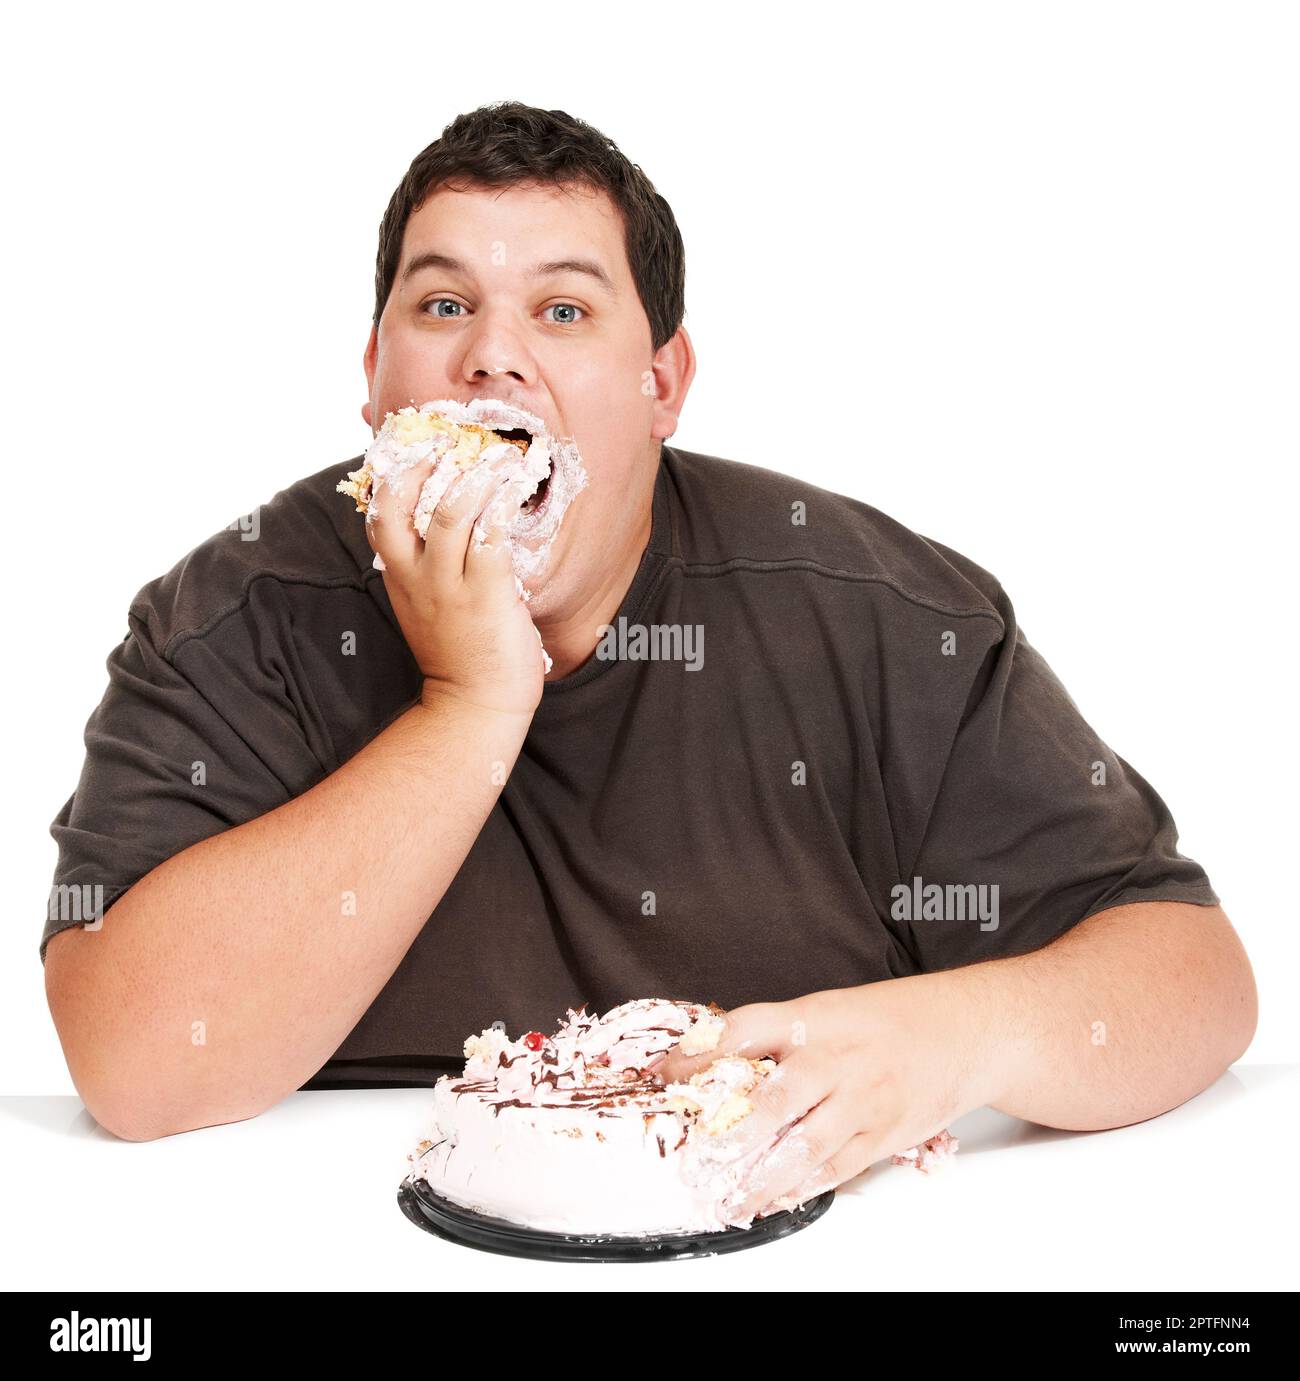 Eating cake in record time. An obese young man stuffing a cake down his face and not being too dainty about it Stock Photo